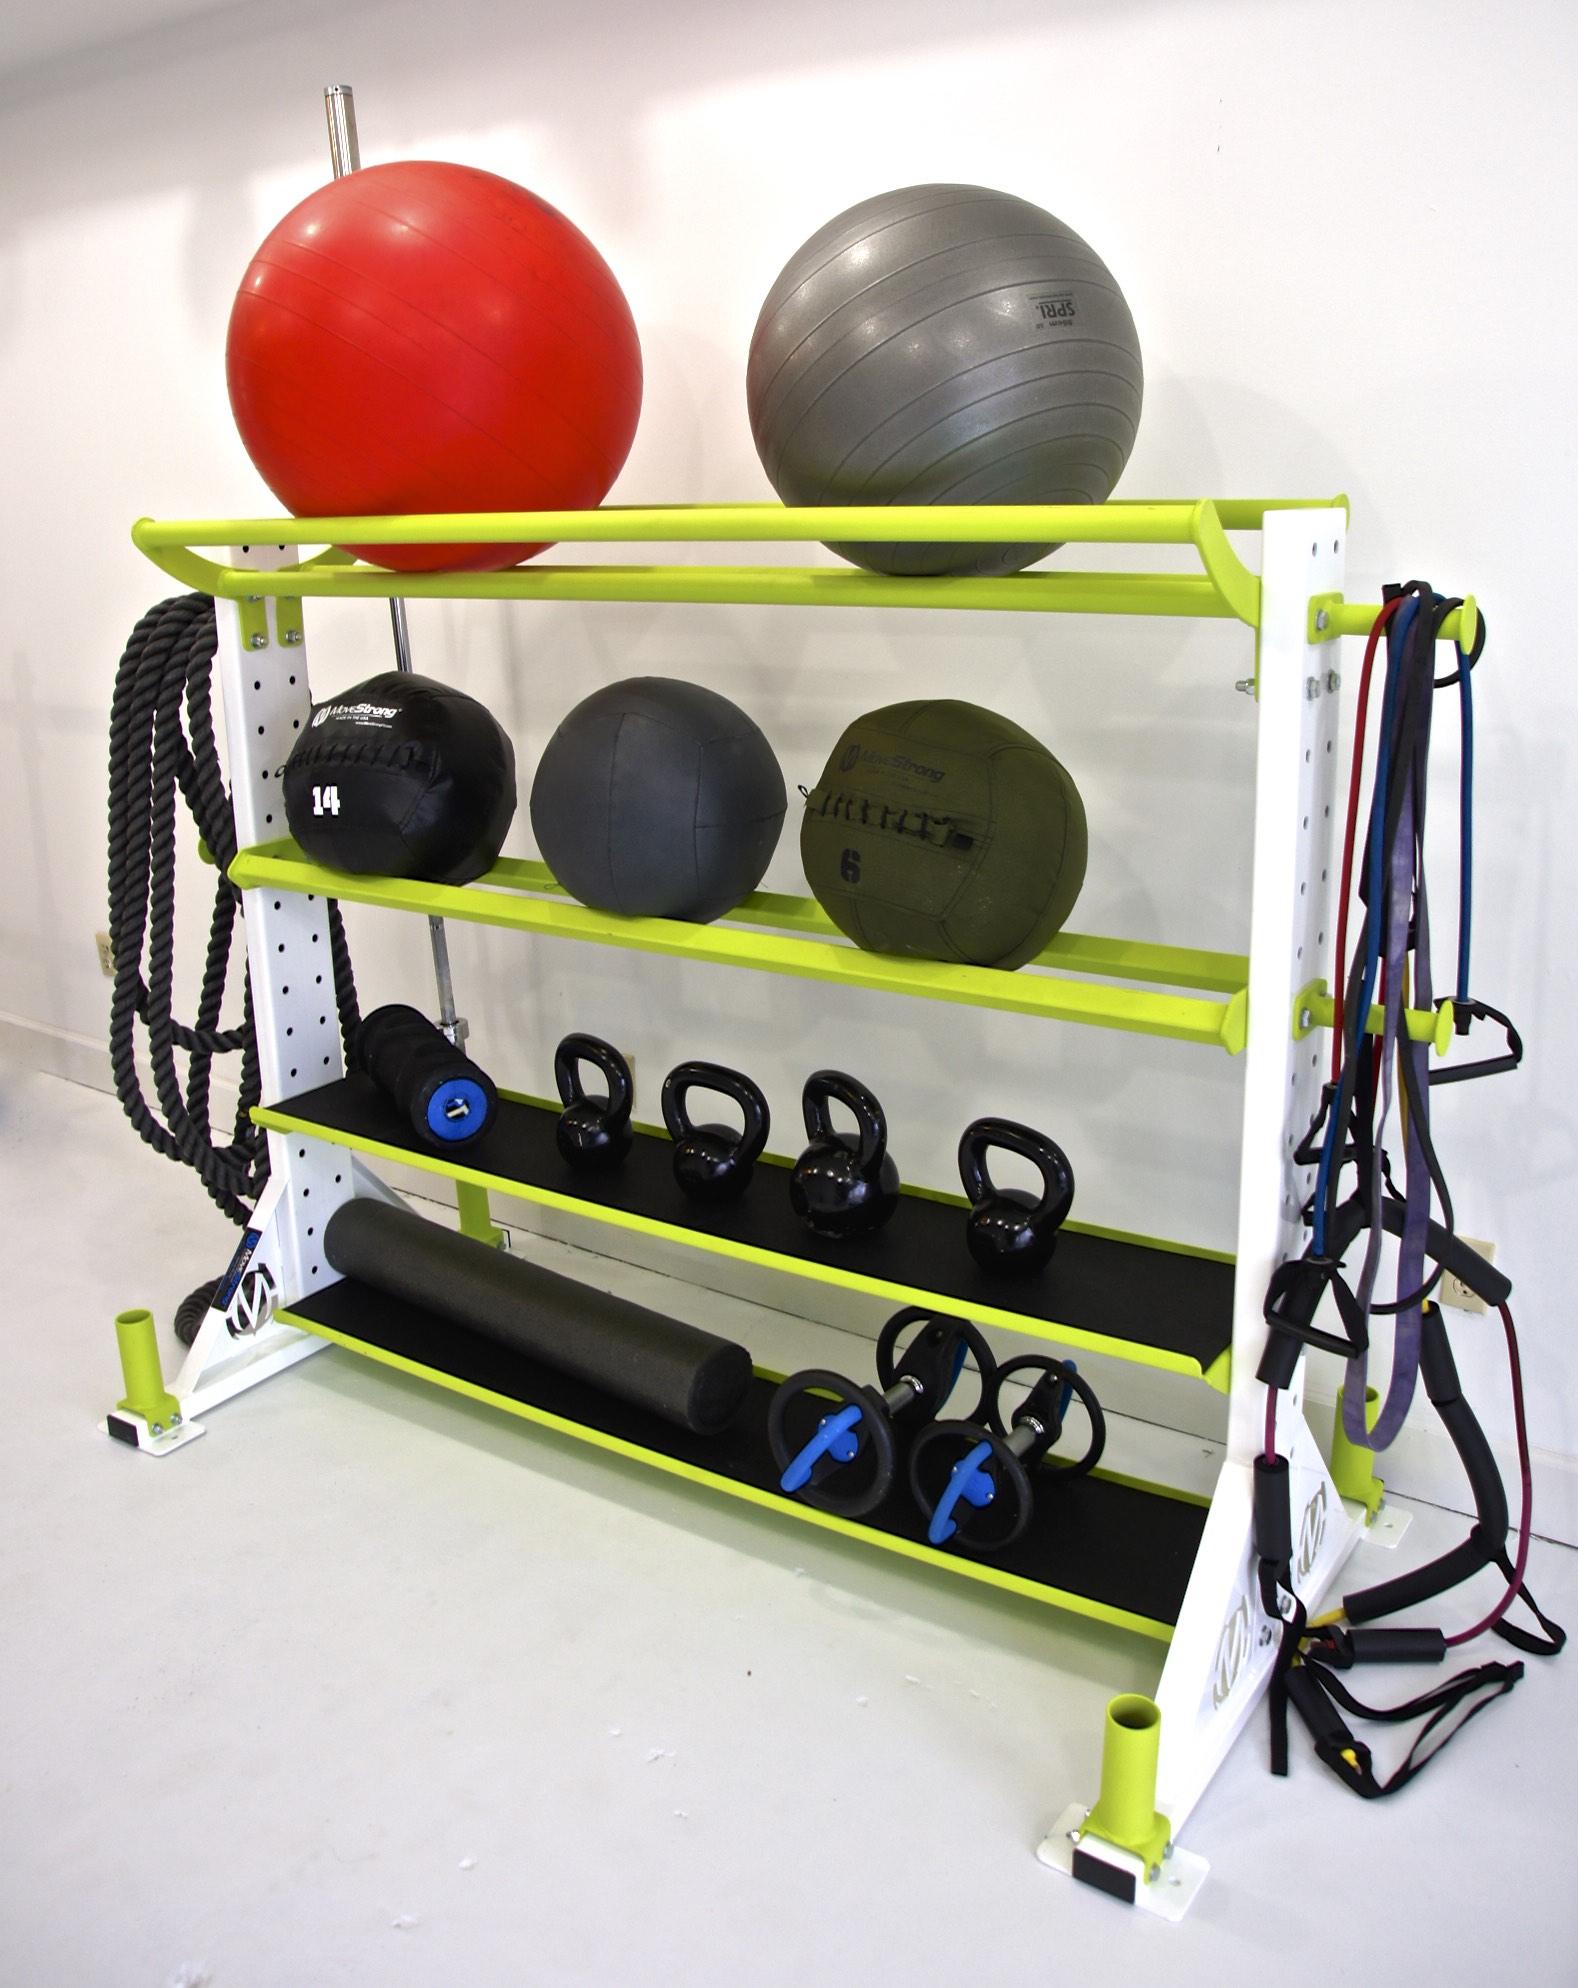 Stability Ball Holder tray on top